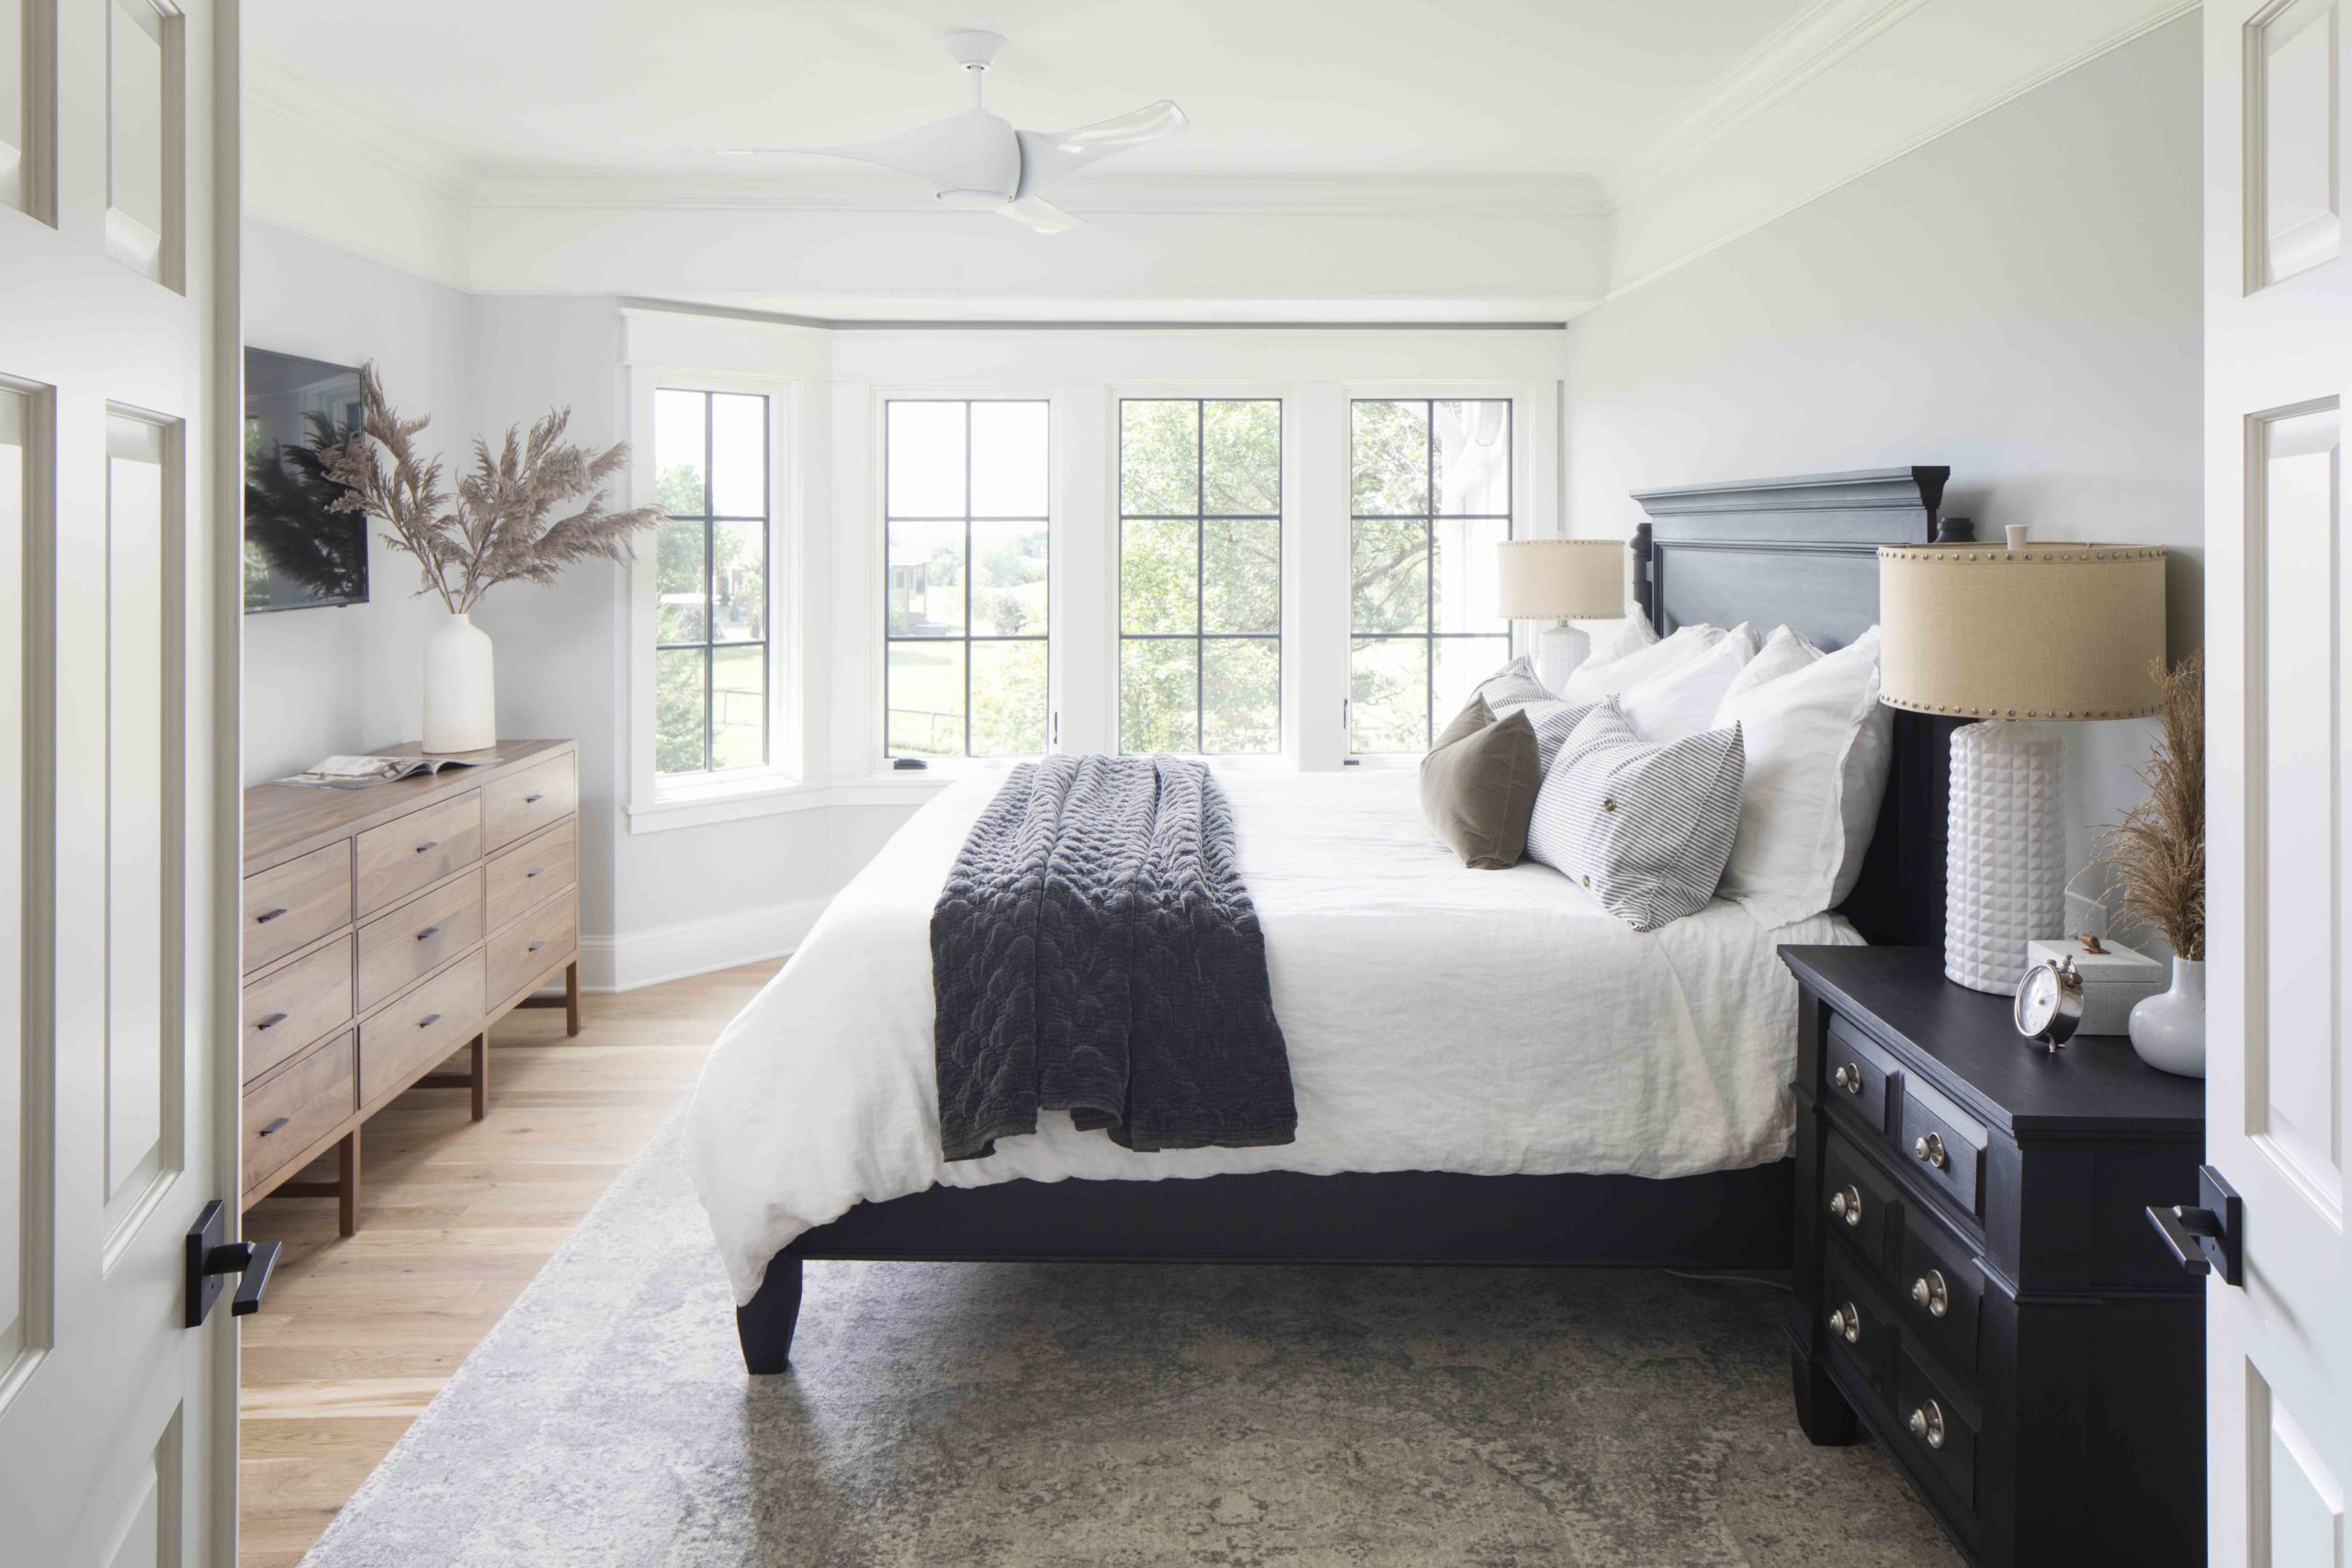 A prairie transitional custom home with a white bed and black dresser.